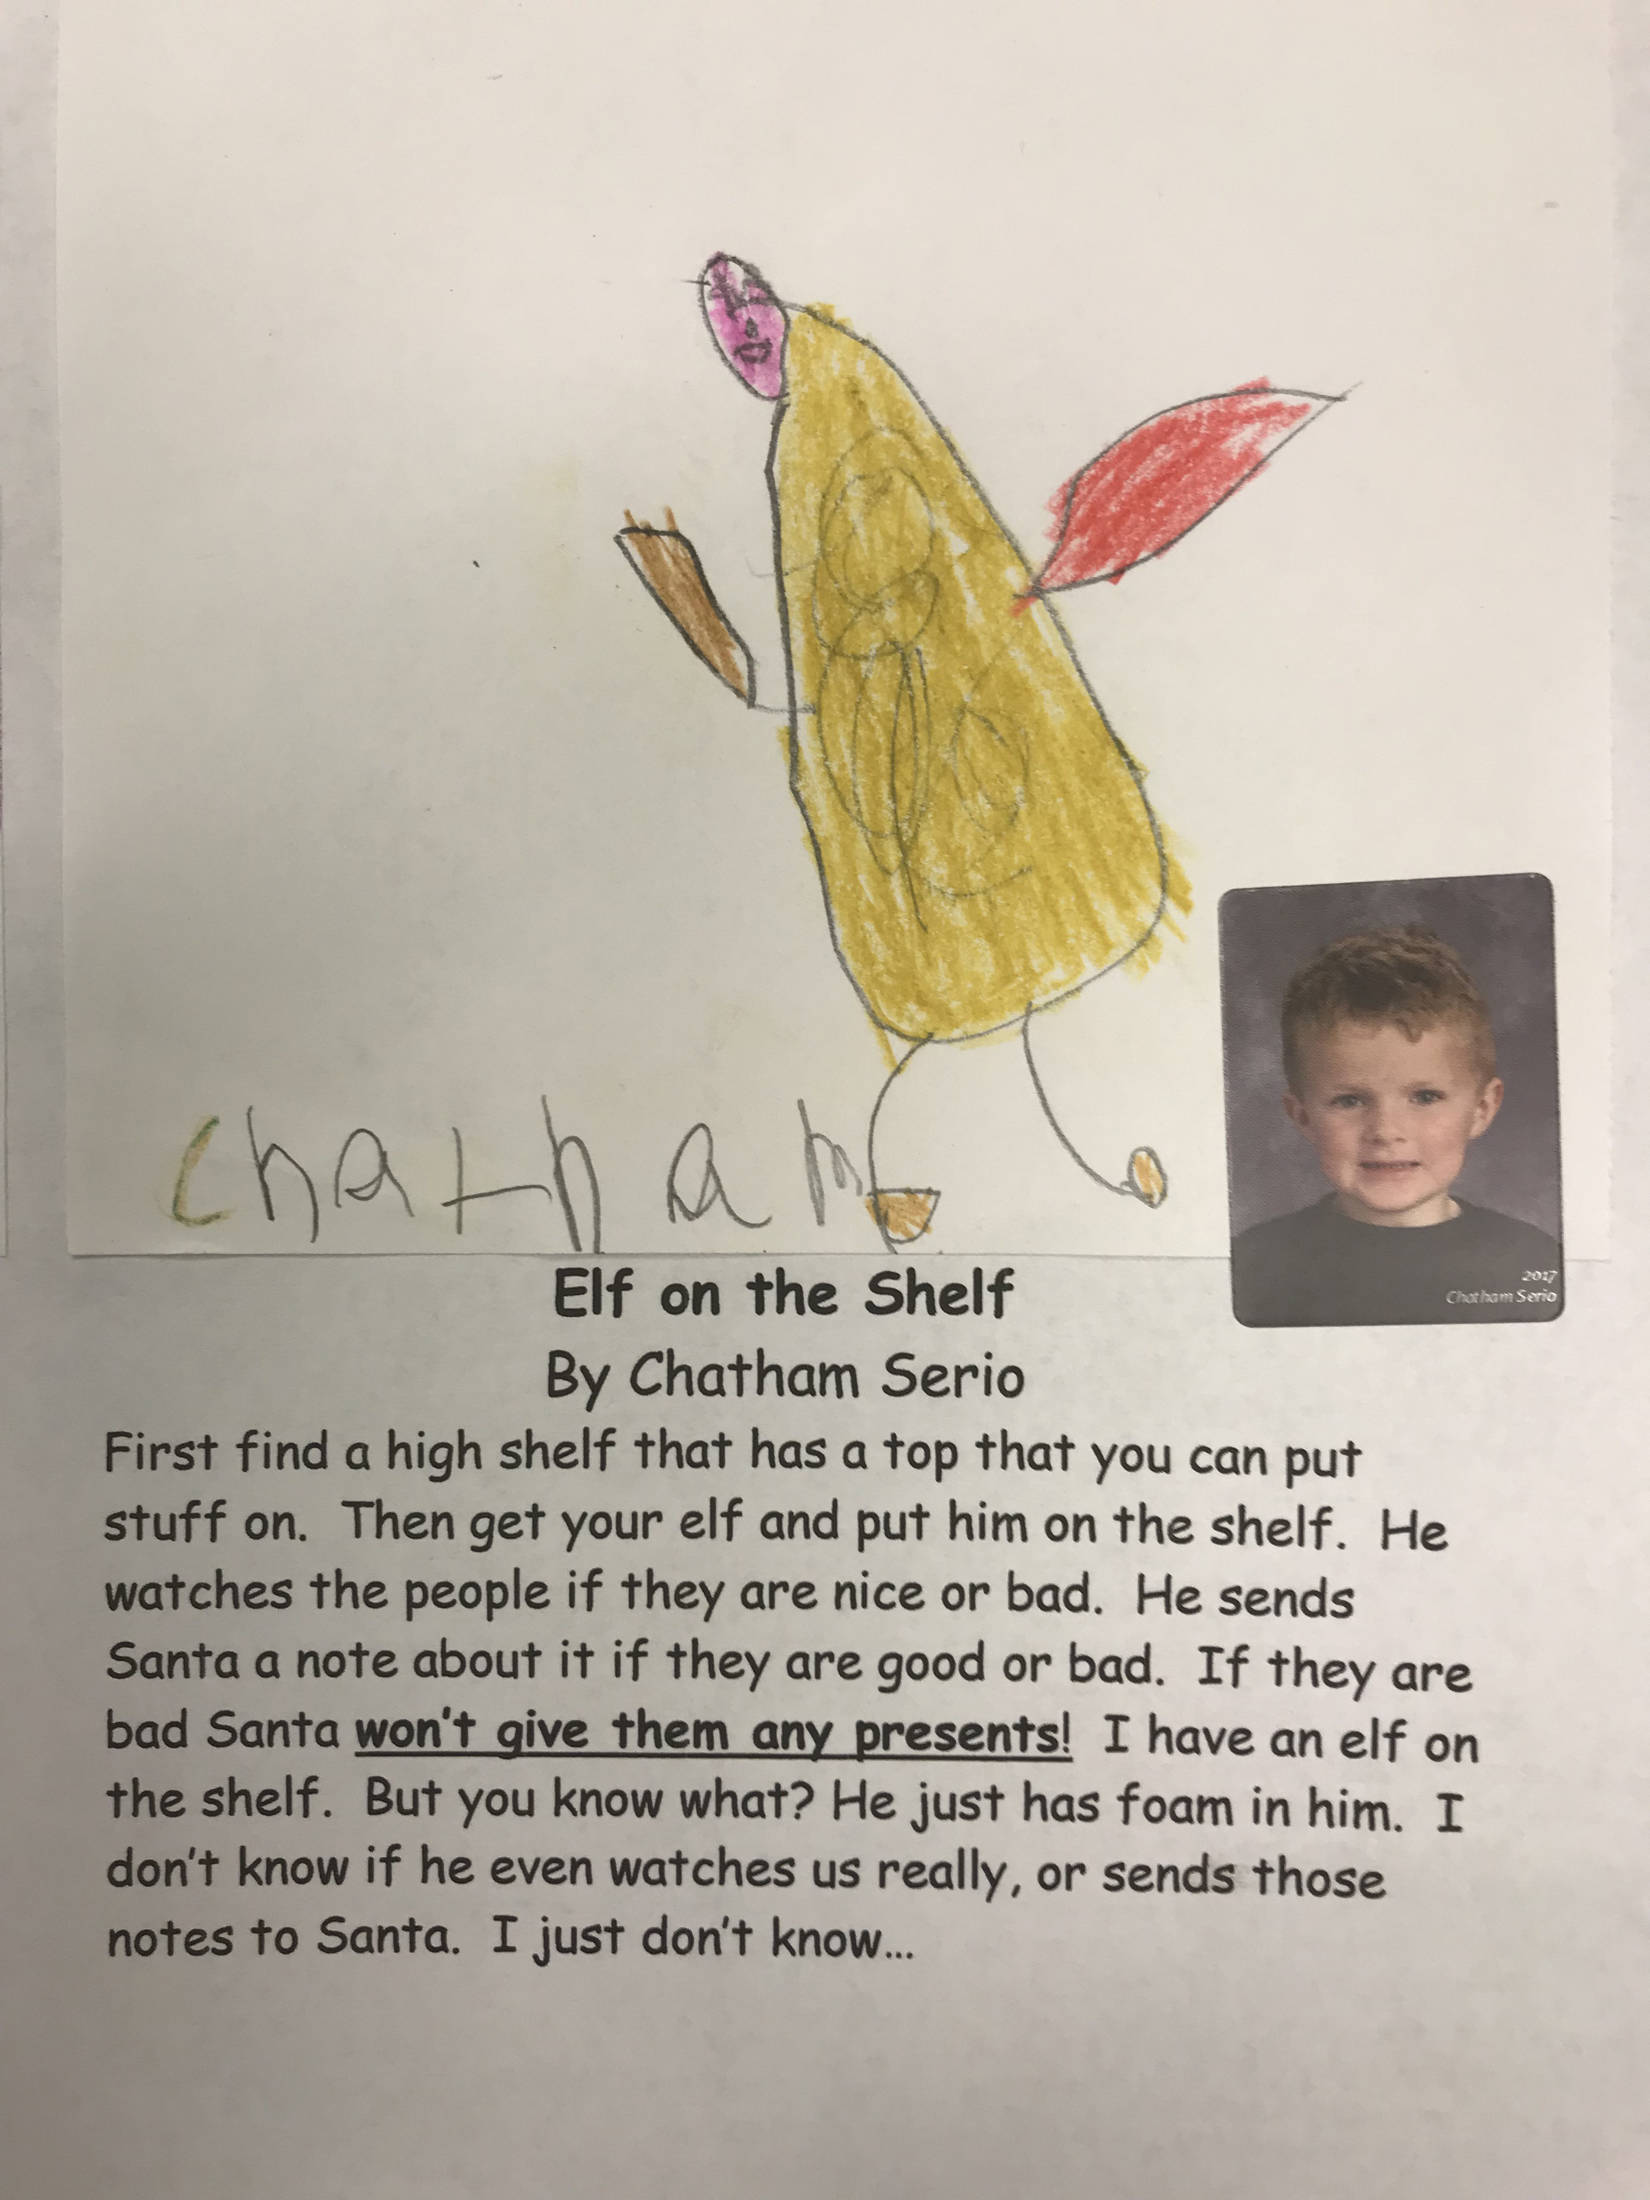 This holiday instruction made by Chatham Serio is part of an 18-page “How to Get Ready for the Holidays” book created by the students of Jennifer Reinhart’s kindergarten class. (Photo courtesy Jennifer Reinhart)